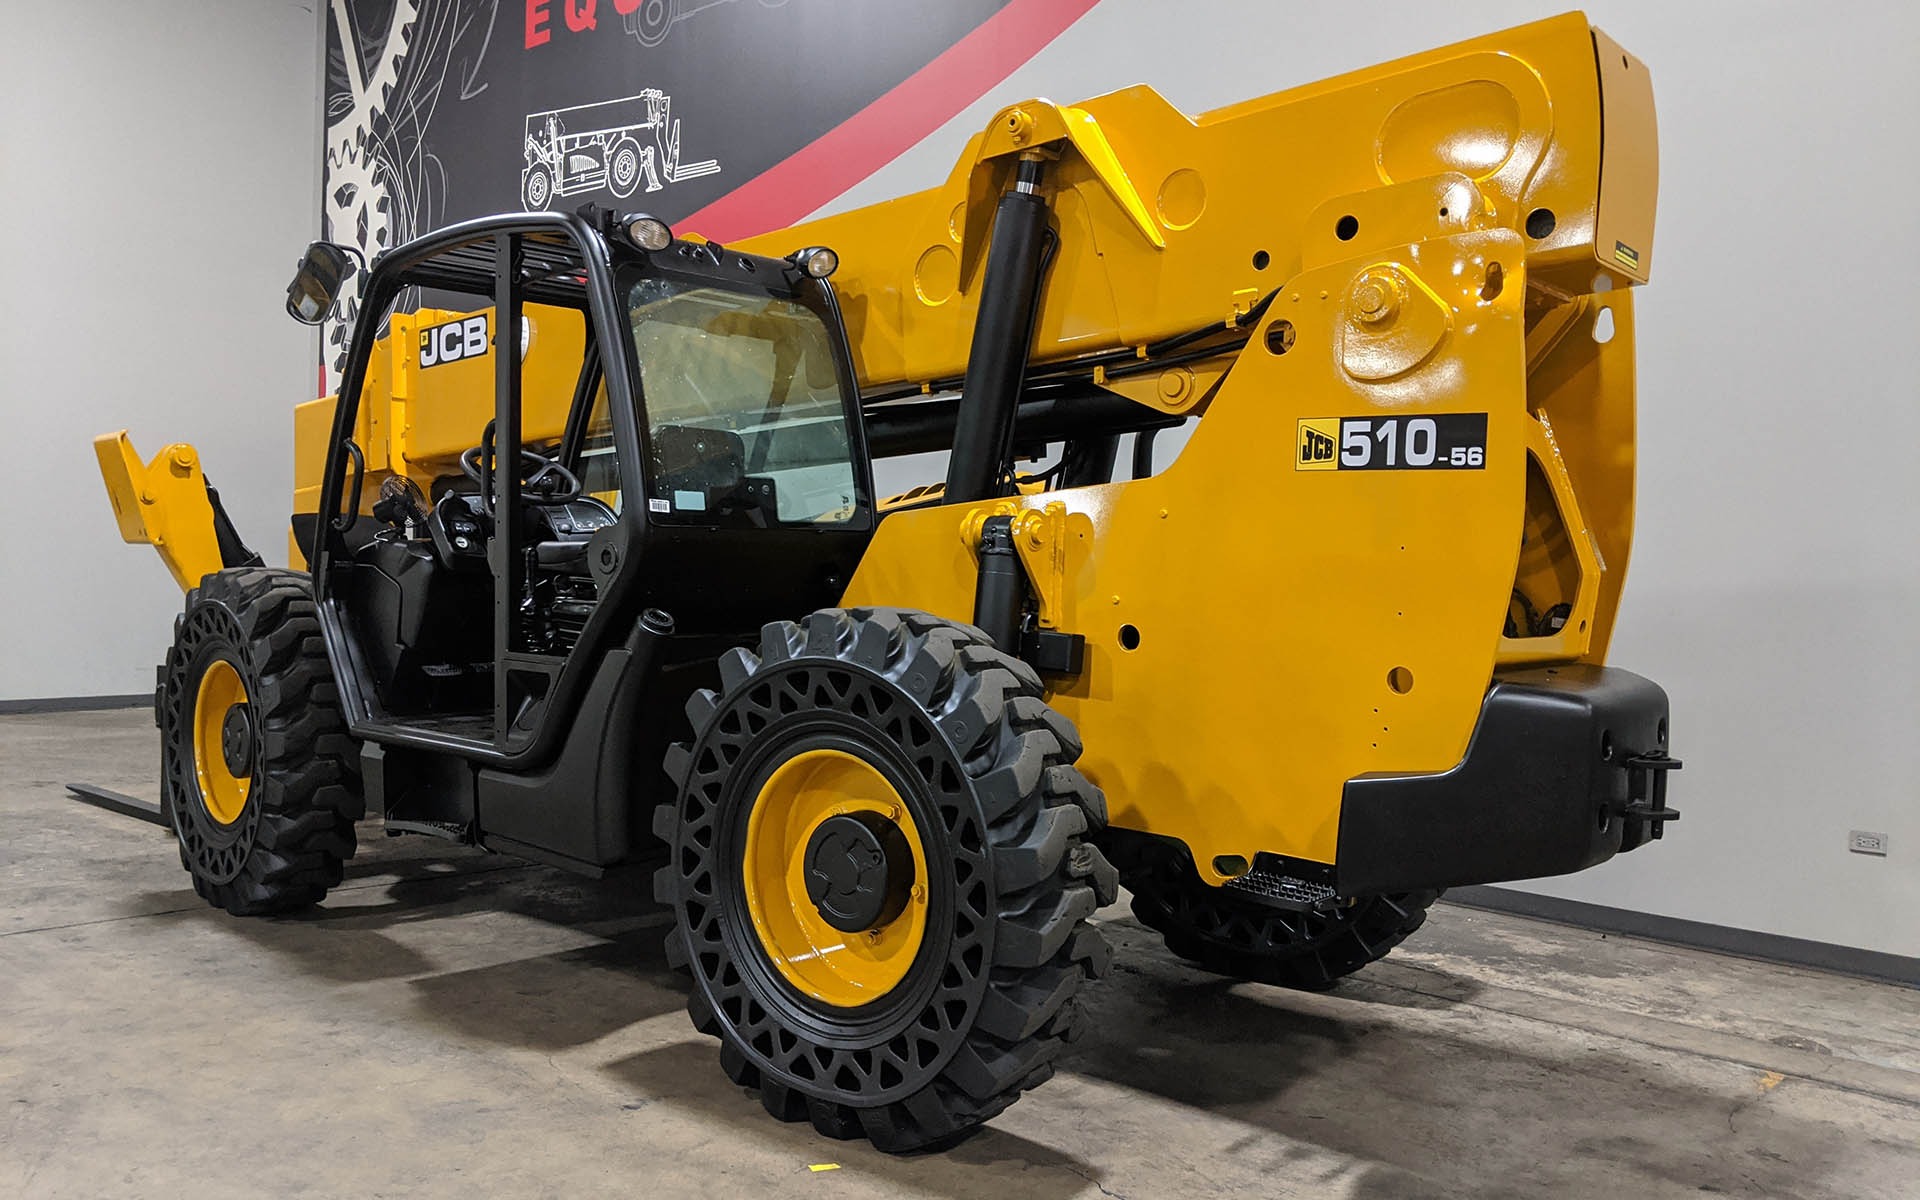 Used 2017 JCB 510-56  | Cary, IL